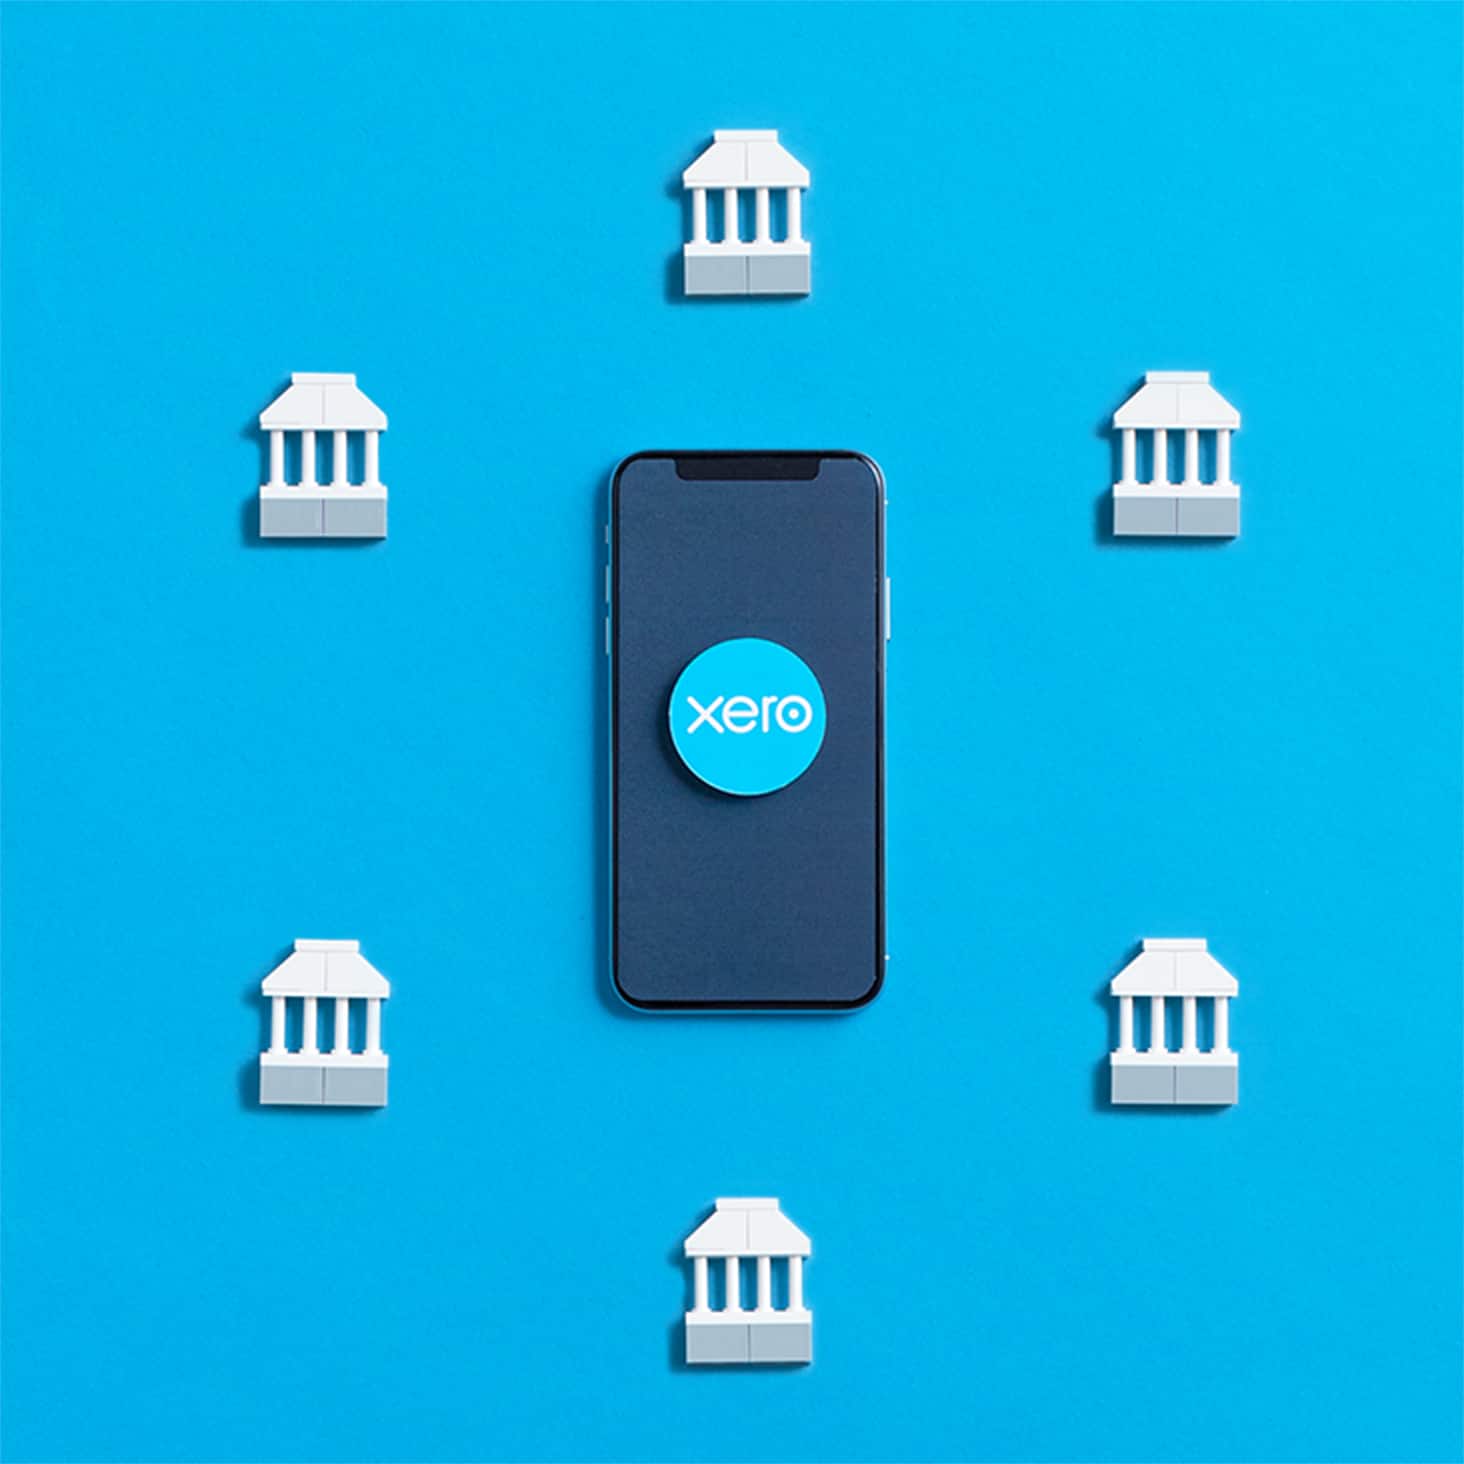 Banks connected to xero